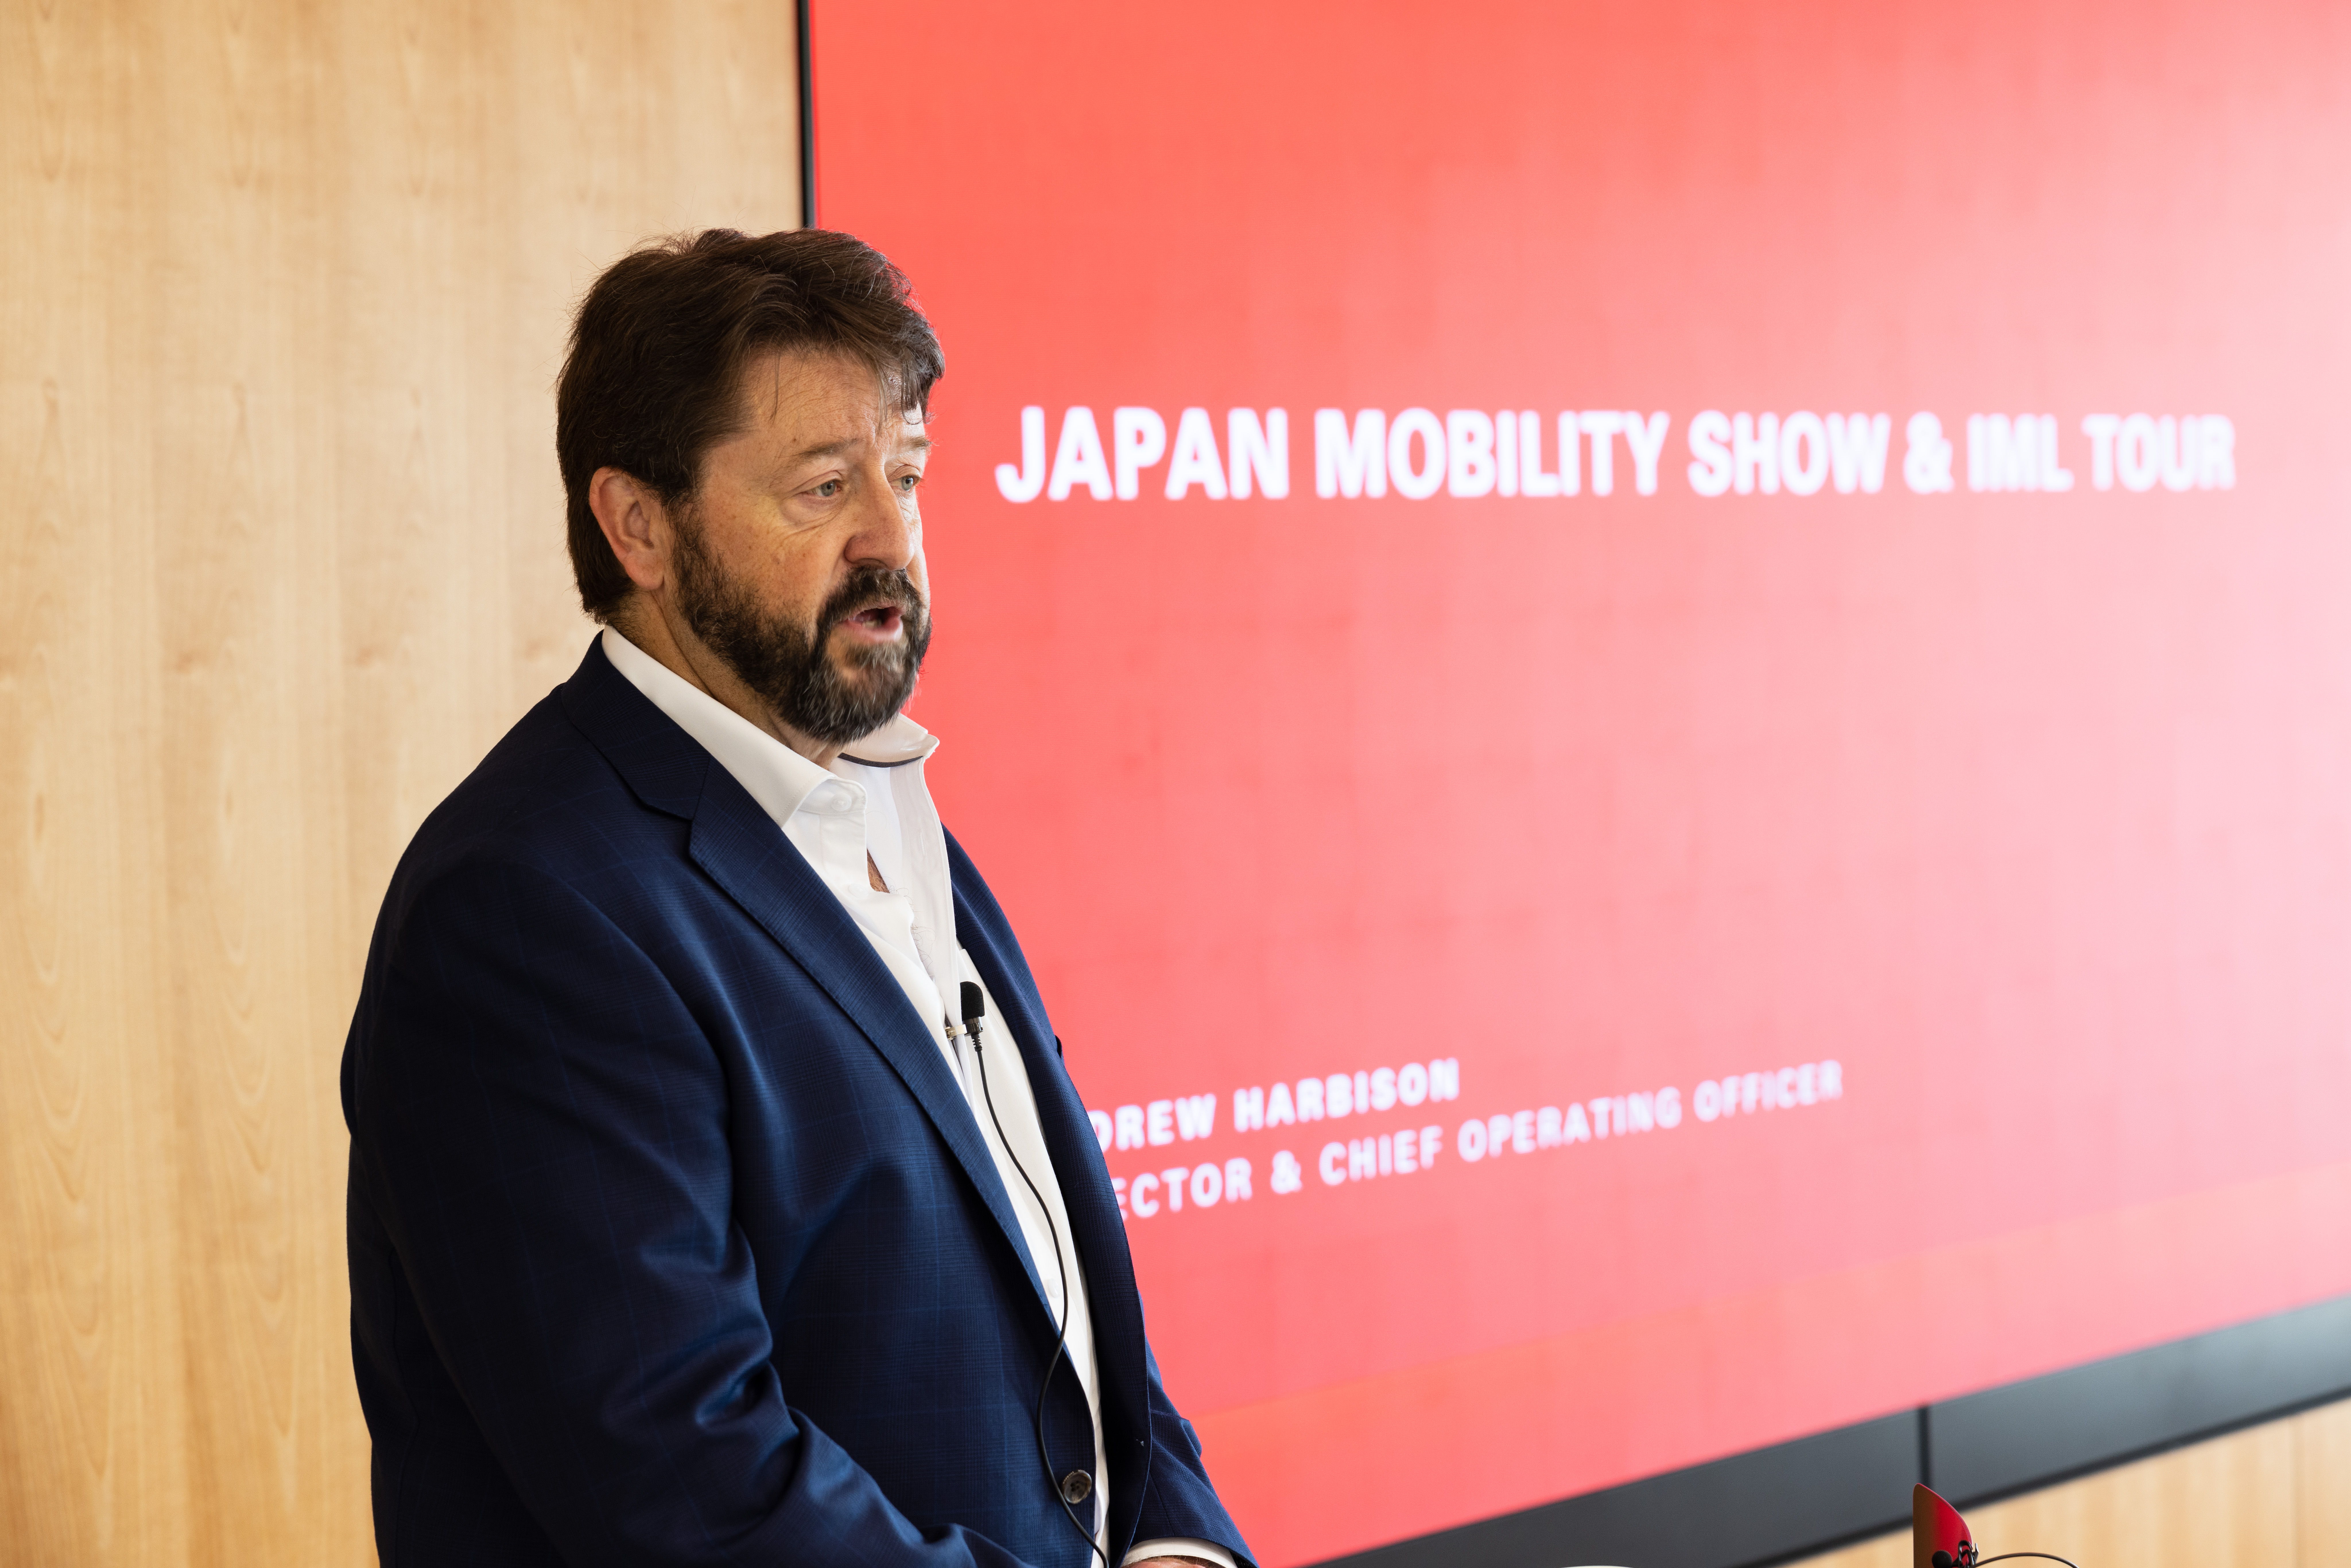 Isuzu Australia Limited Director and Chief Operating Officer, Andrew Harbison